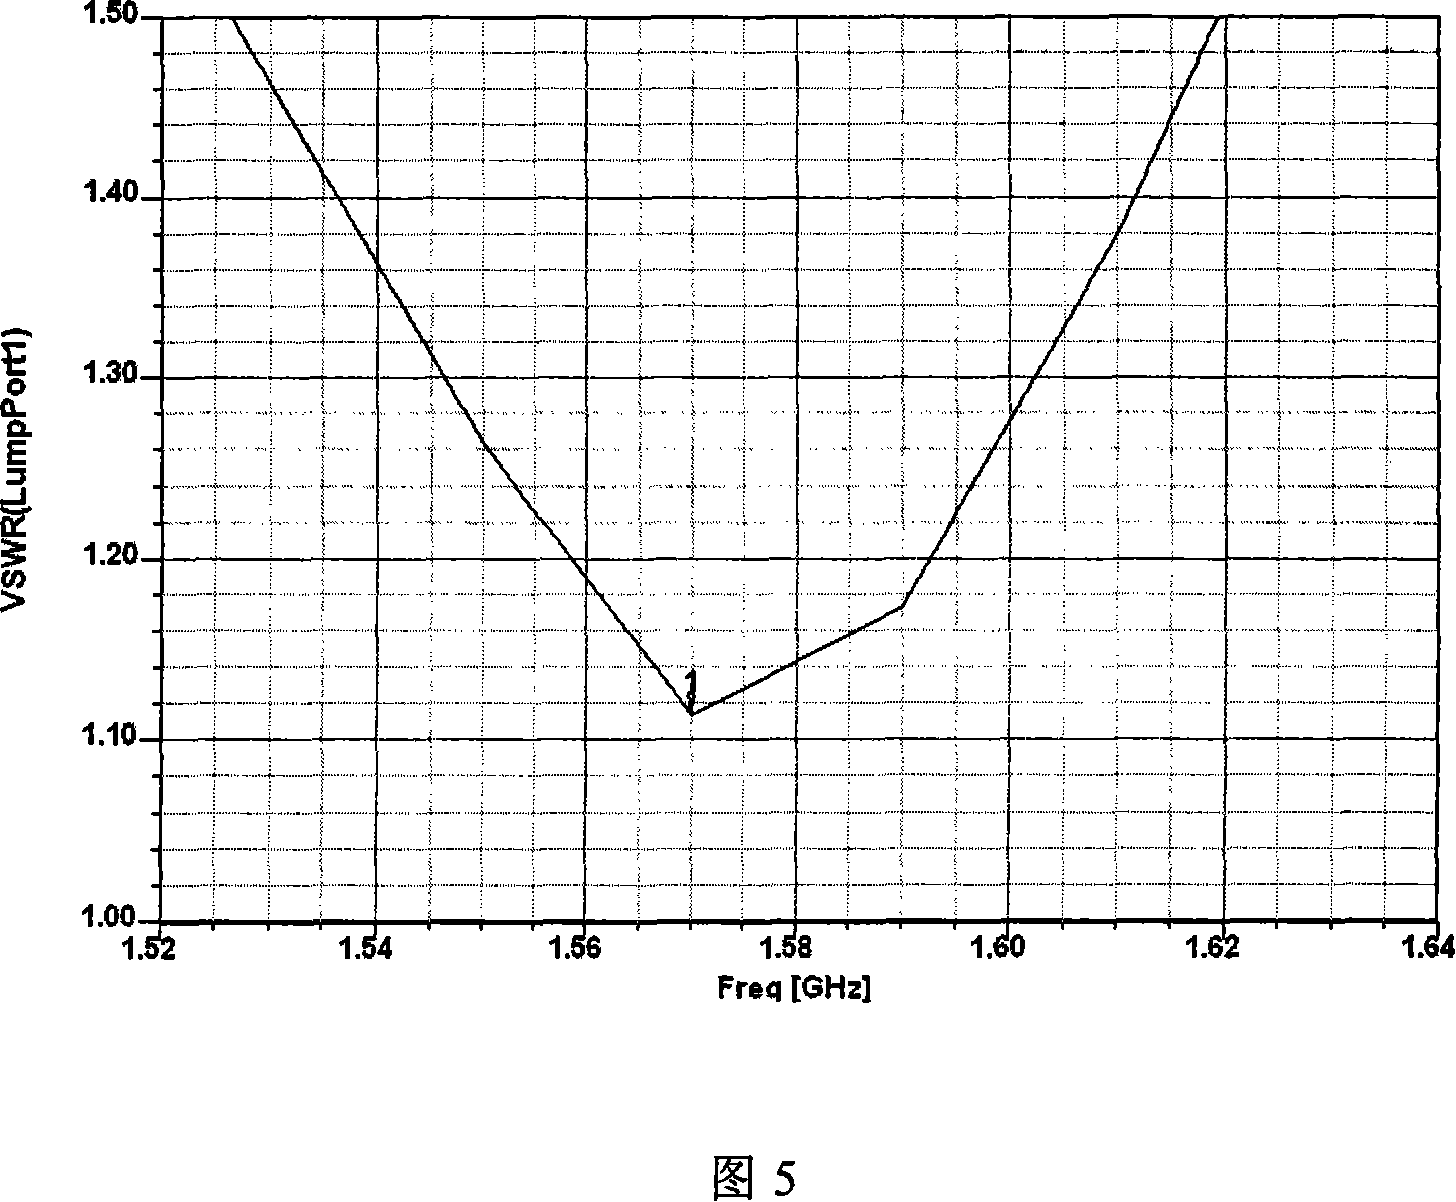 Ring satellite navigation antenna for improving low elevation gain and method for making same